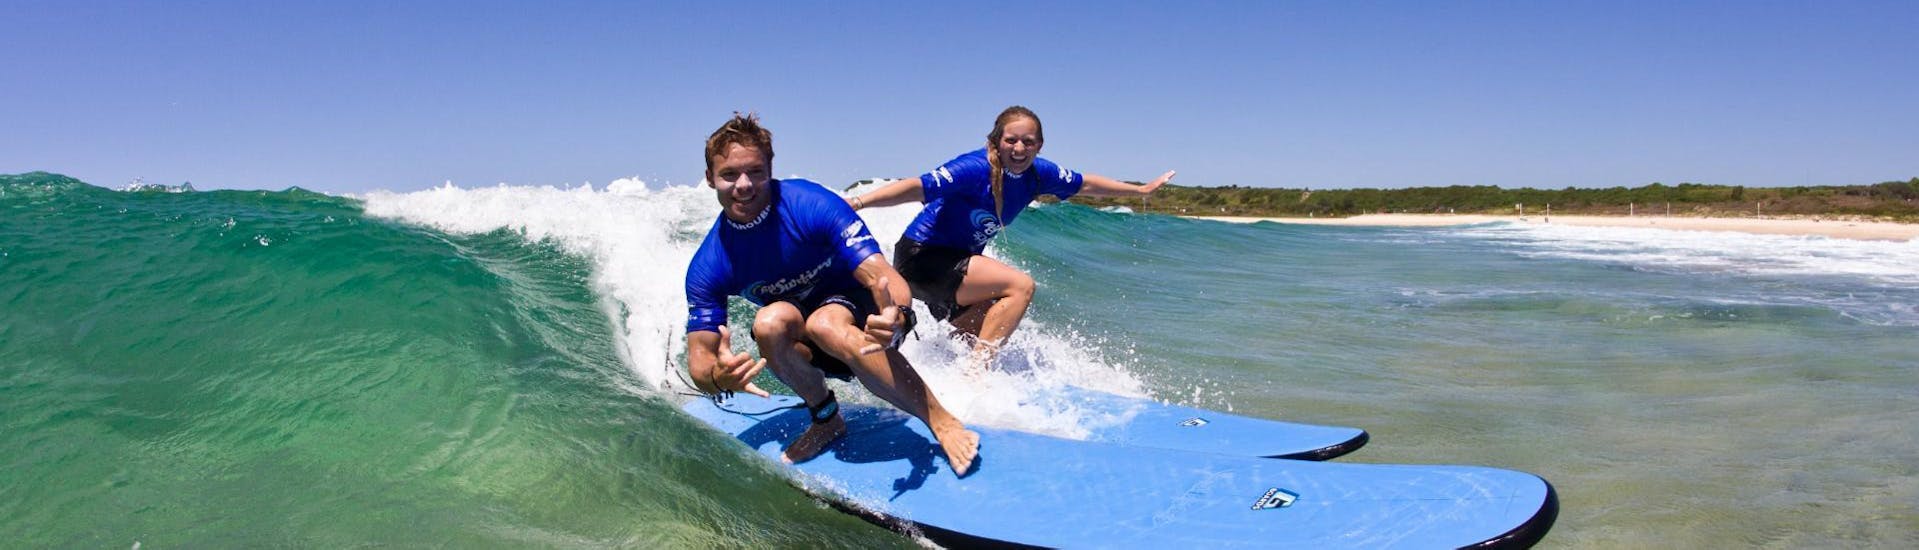 Two friends are having a great time on a surfboard during the Surfing Lessons in Maroubra for Teens & Adults - Beginner organised by Let's Go Surfing.